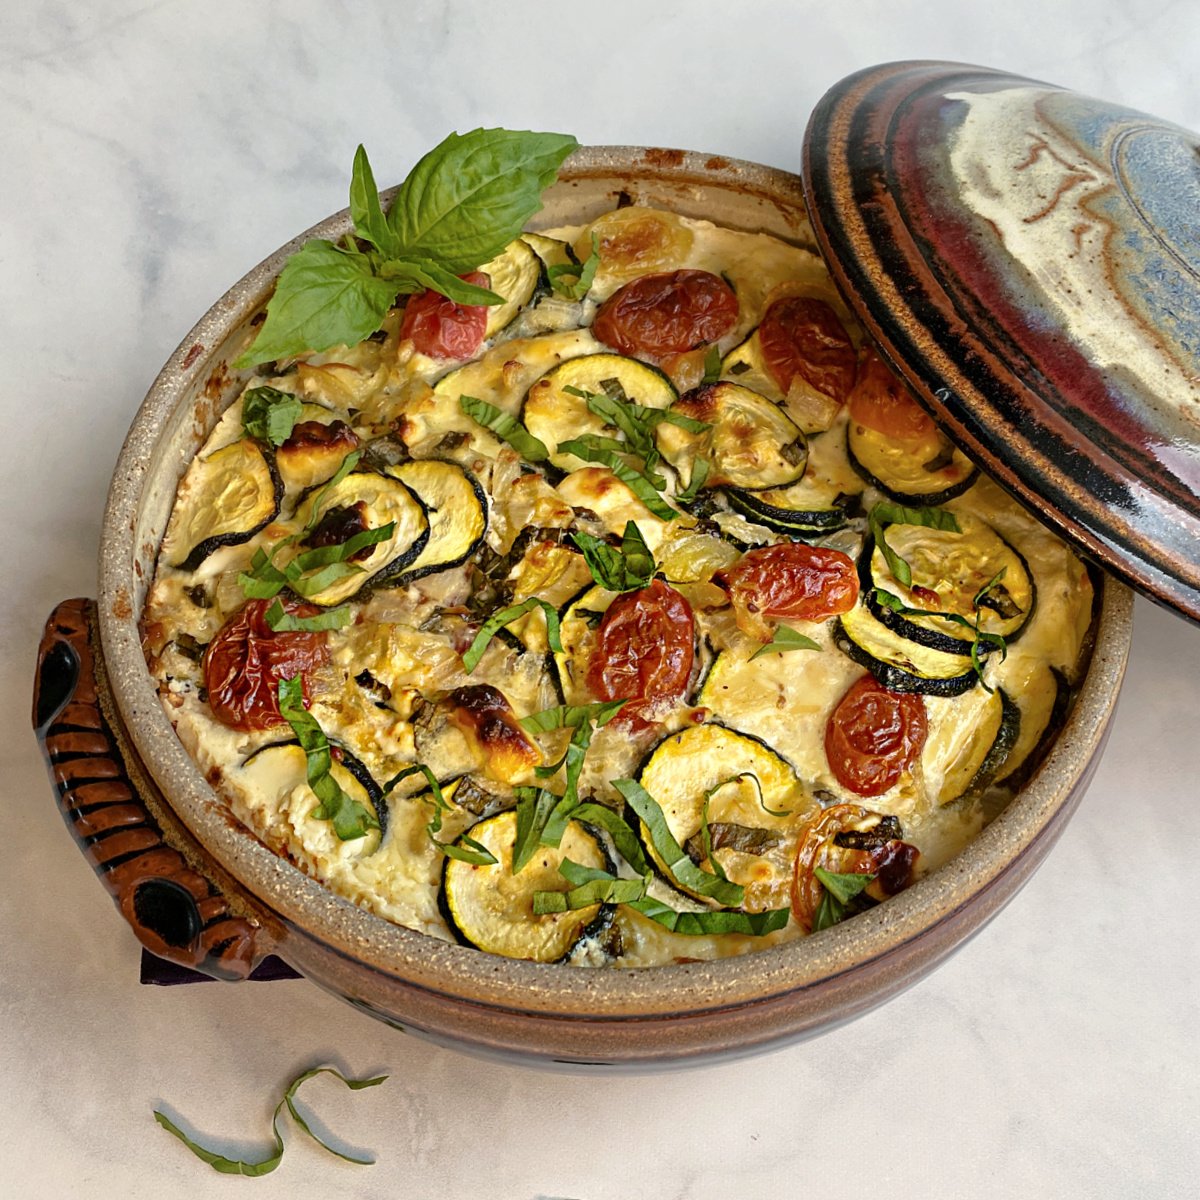 Baked zucchini casserole with tomatoes in a crockery casserole dish, garnished with chiffonaded basil. Casserole lid leaning on the side.